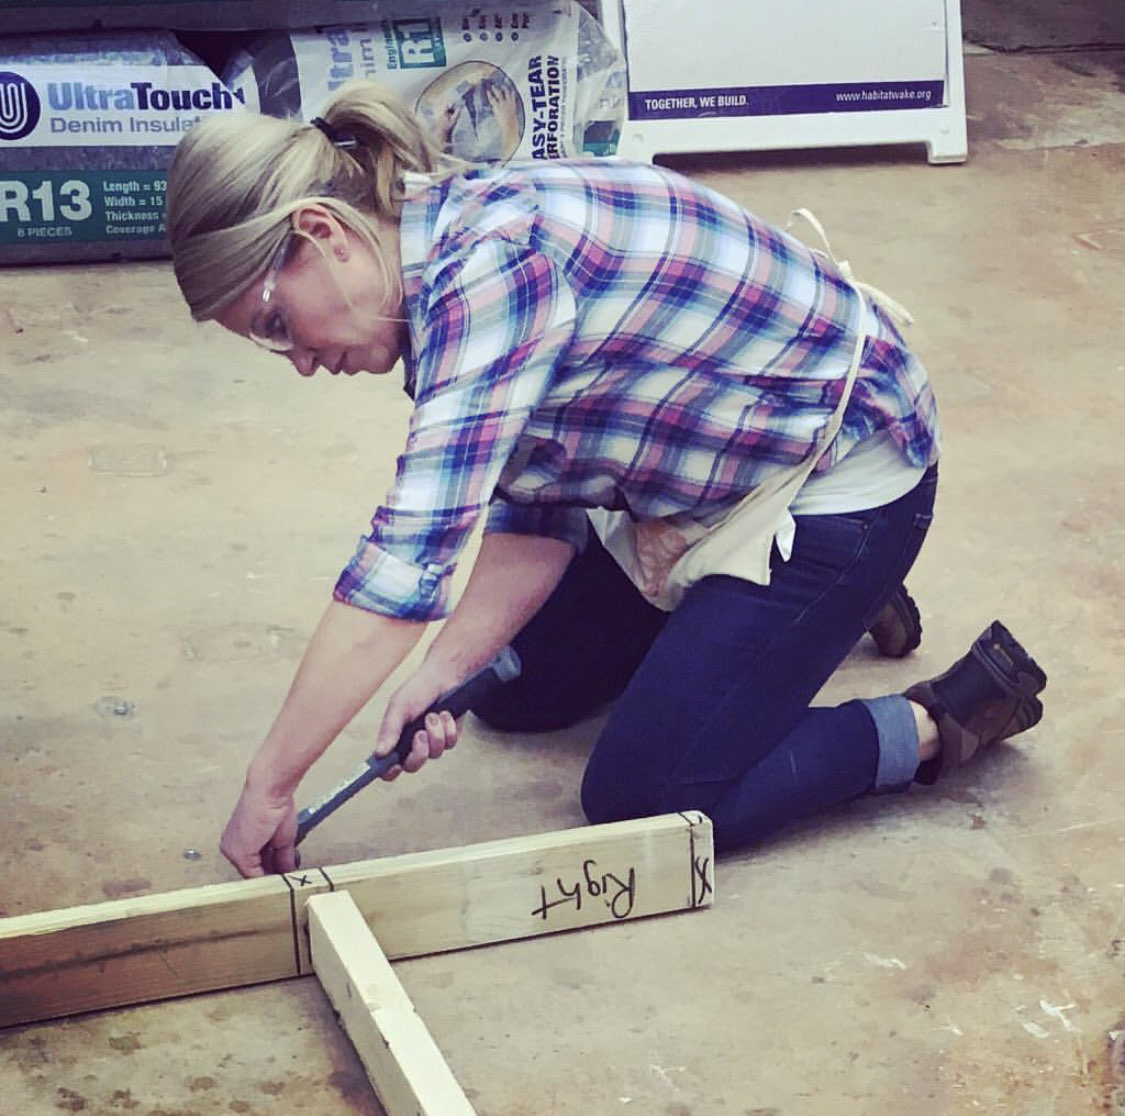 Habitat Wake Women Build board chair in the warehouse hammering on a wall frame